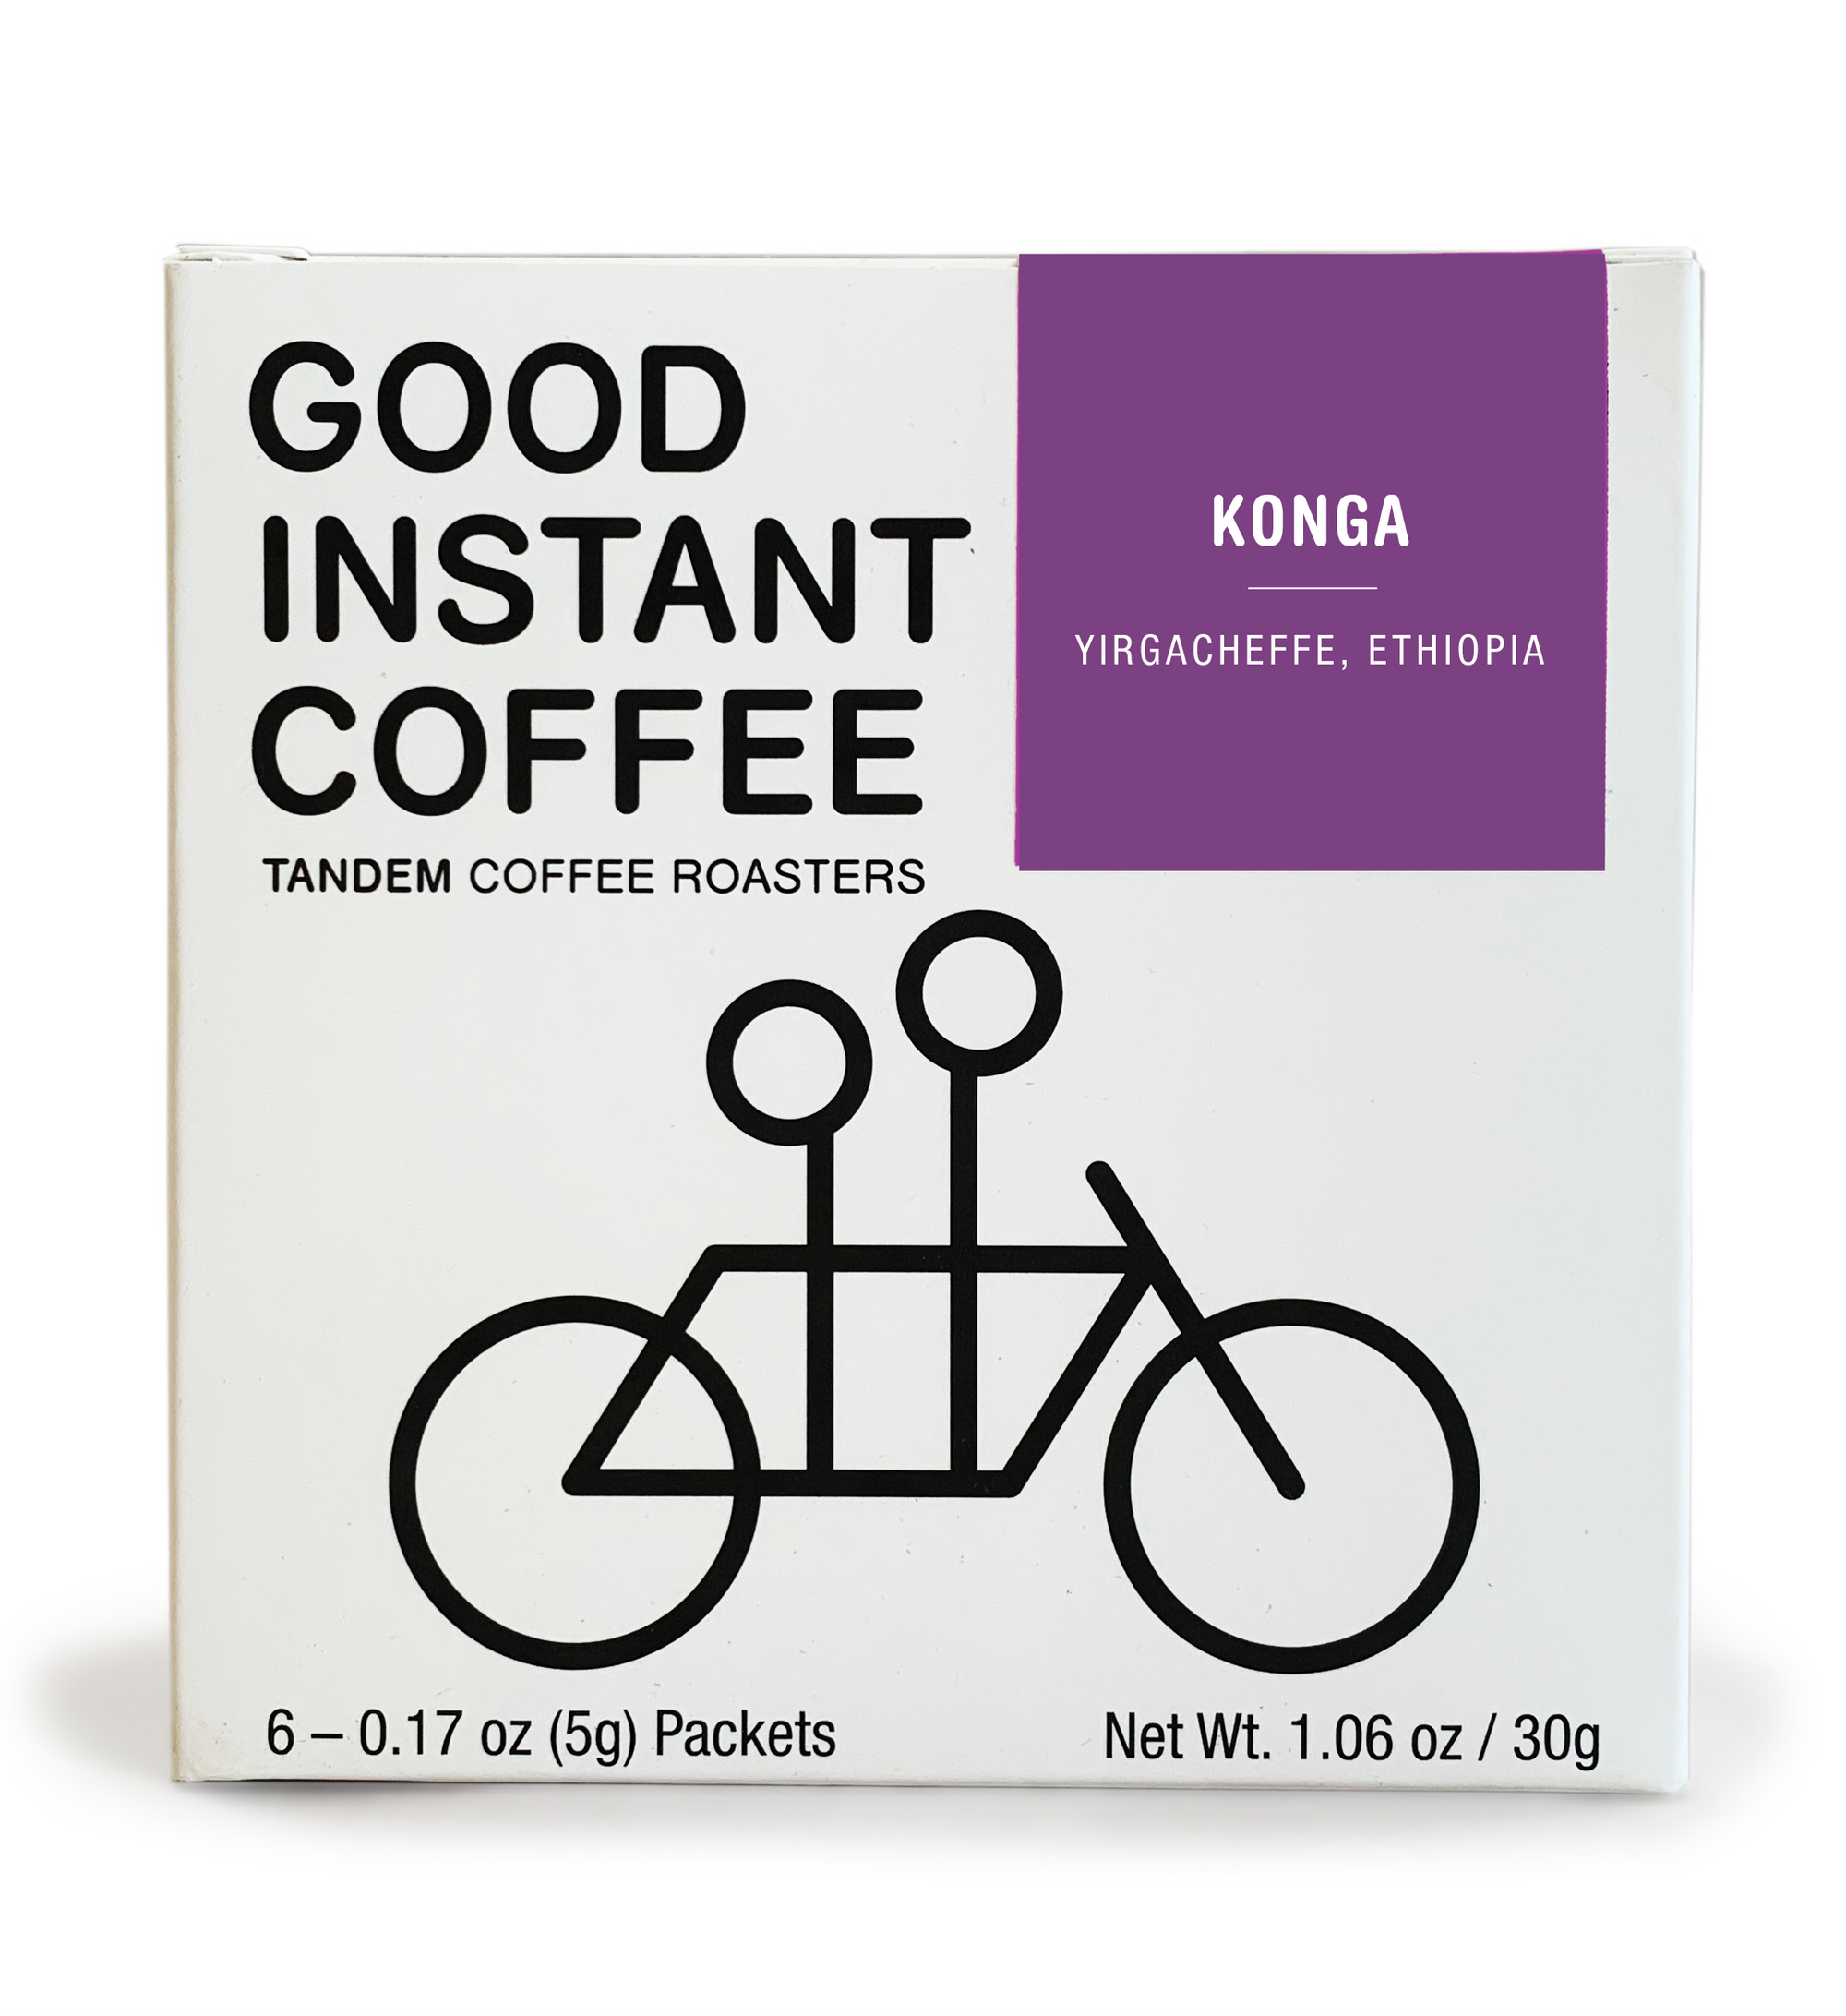 Sentence with replaced product: A square package of Ethiopia - Instant Coffee - 6 Pack labeled "konga yirgacheffe, ethiopia" by Tandem Coffee Roasters, perfect for camping, featuring a simple, graphic illustration of a tandem